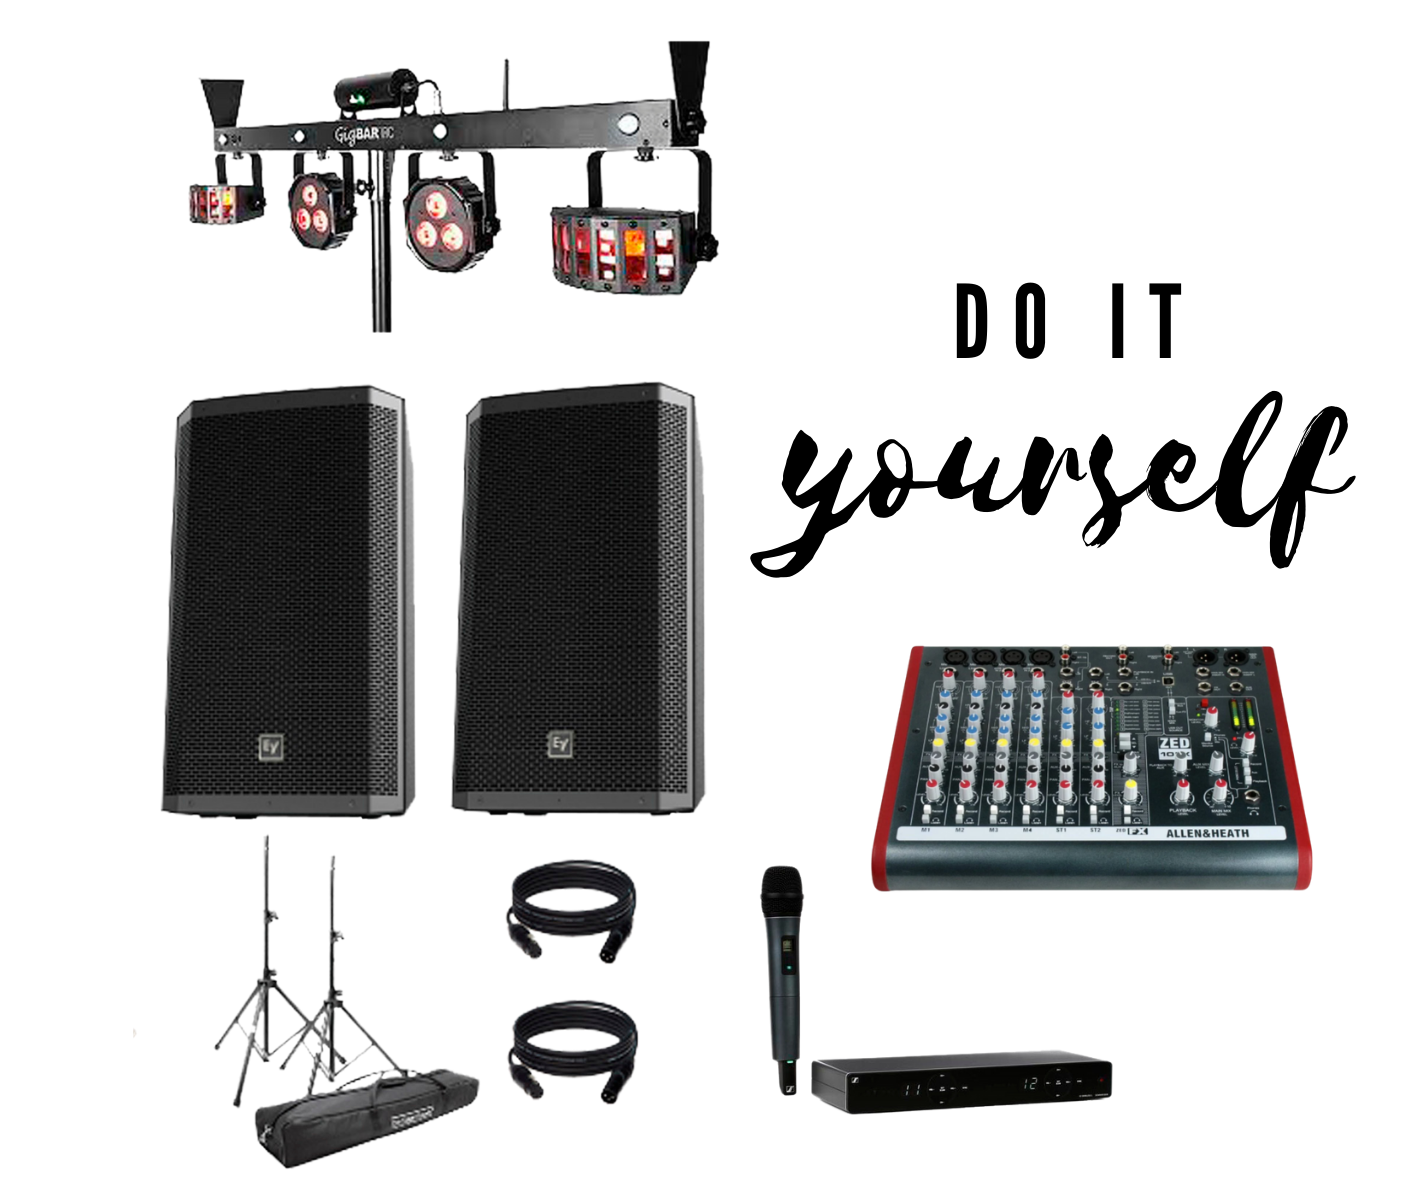 DIY Party DJ equipment for rent in Calgary and Red Deer.